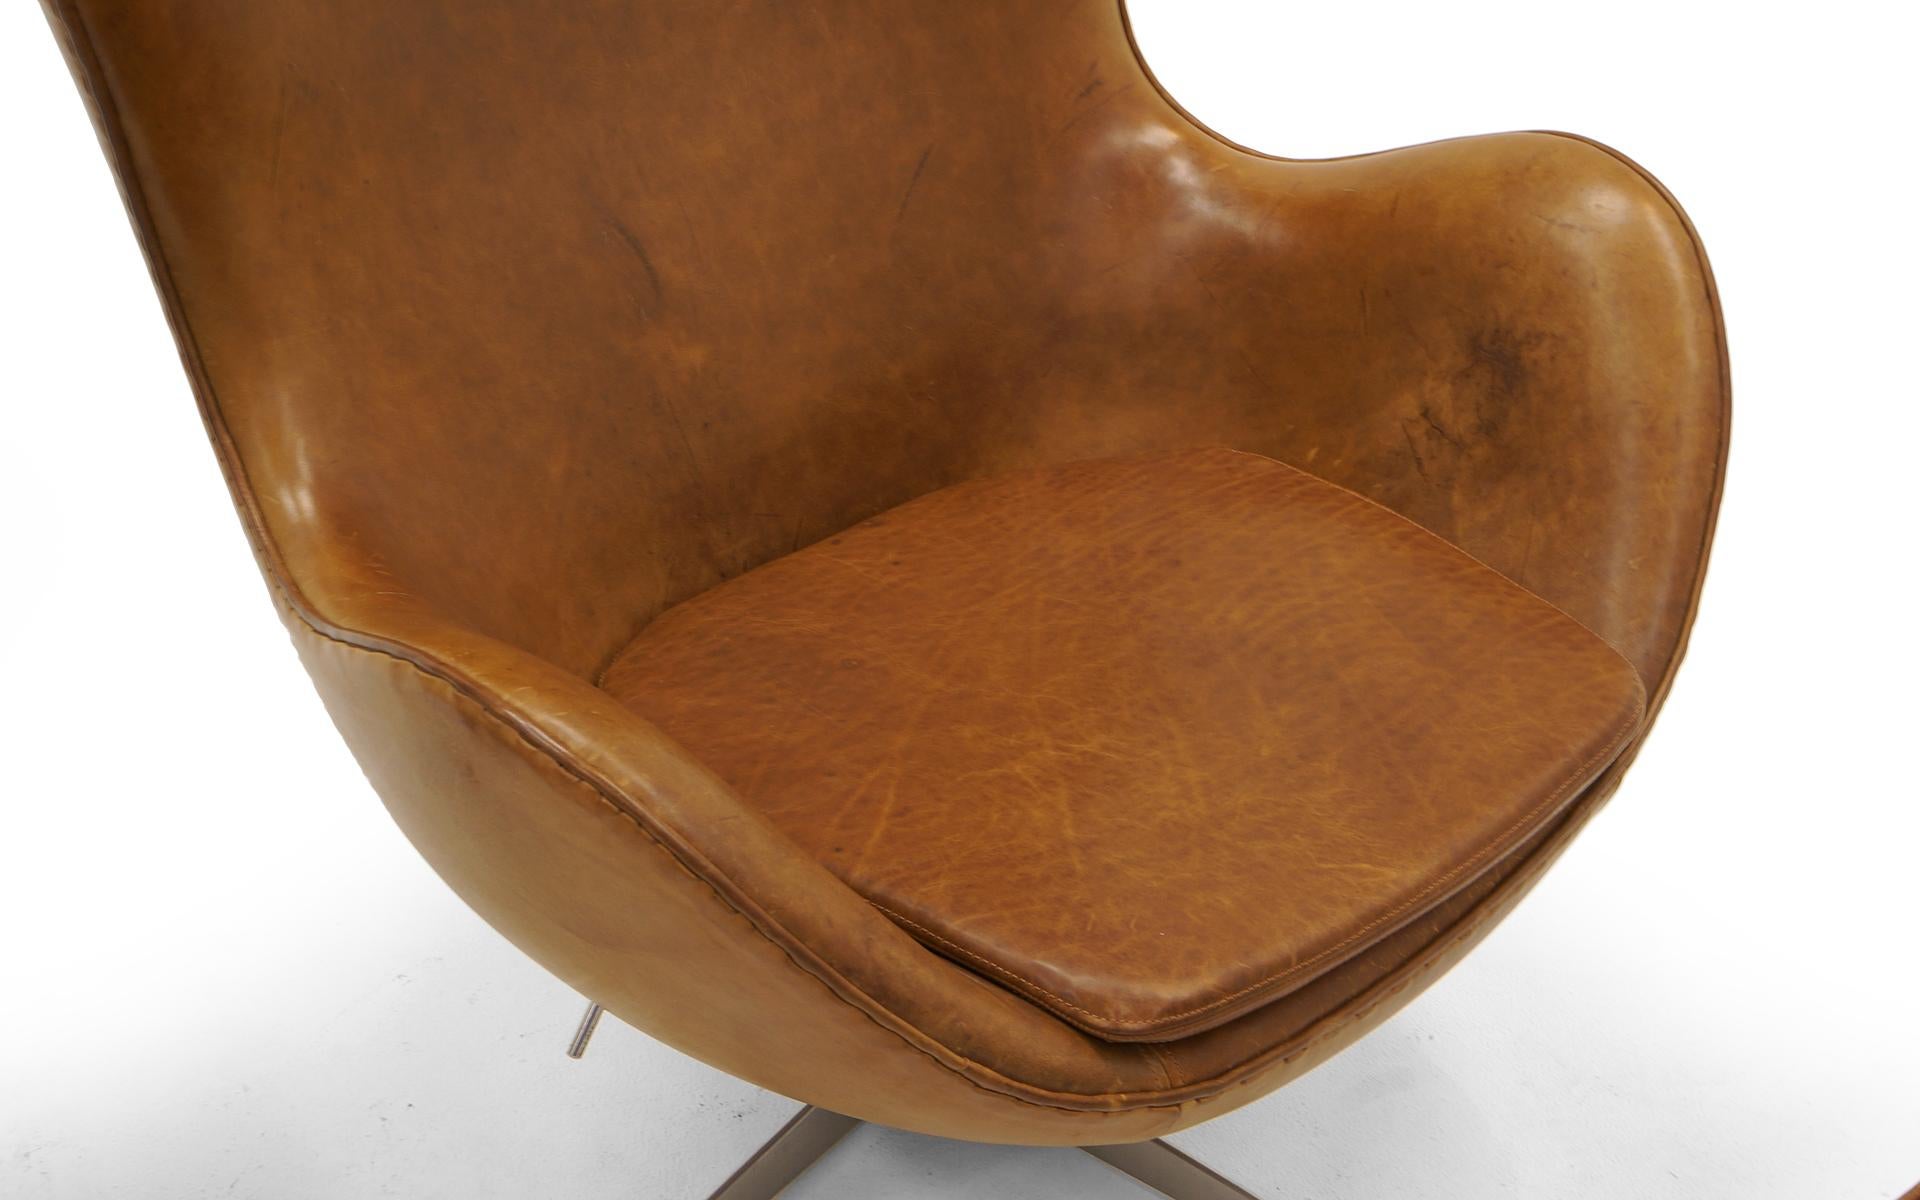 Contemporary Pair Arne Jacobsen Egg Chairs with Ottomans, Cognac Leather. Price is for all.